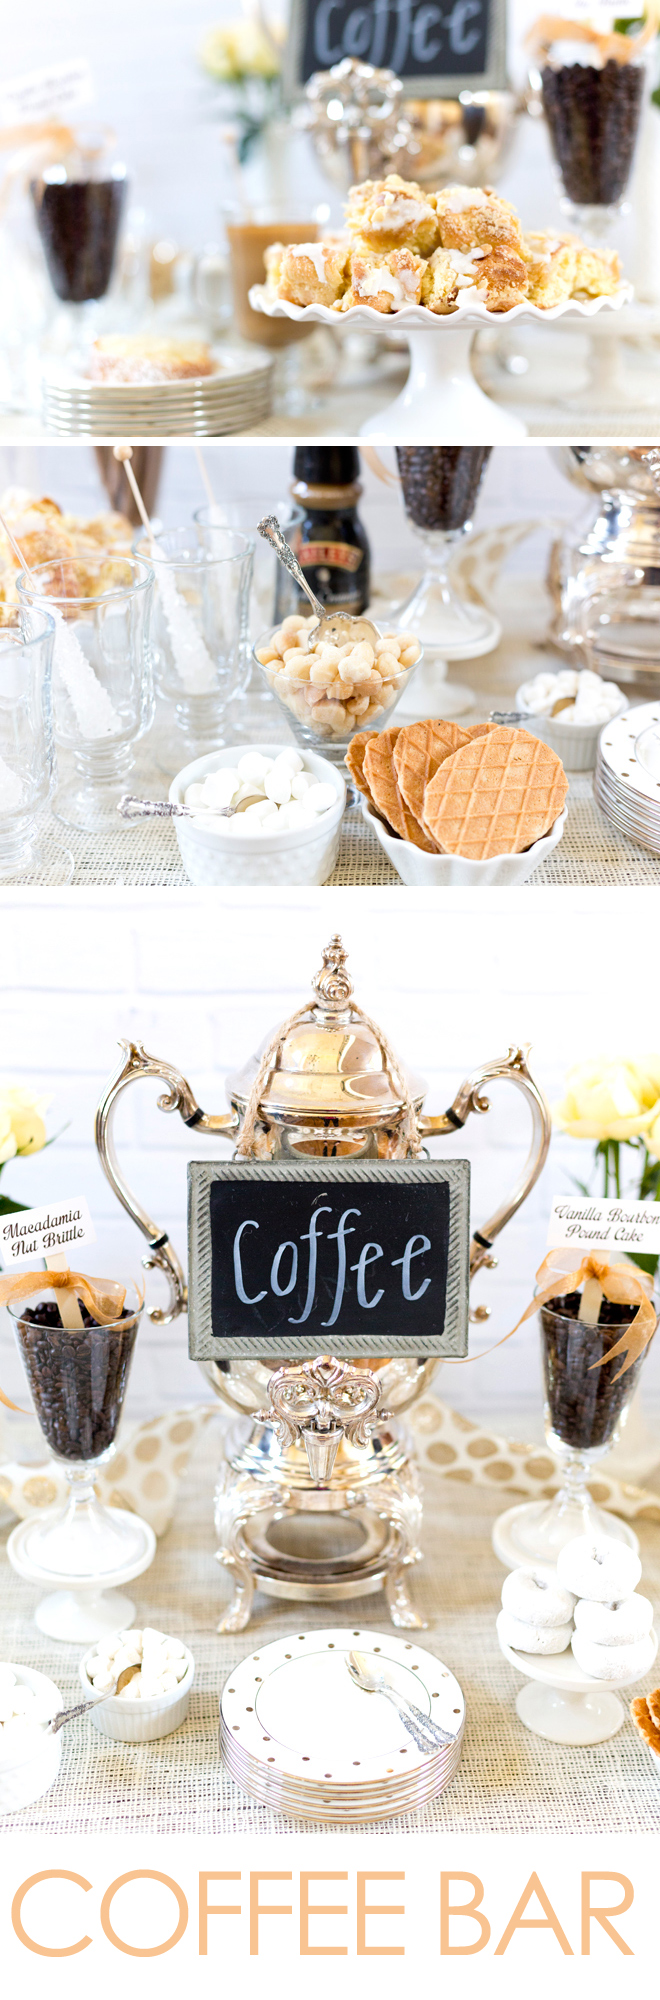 How to Make Coffee for a Large Party - Professional Series